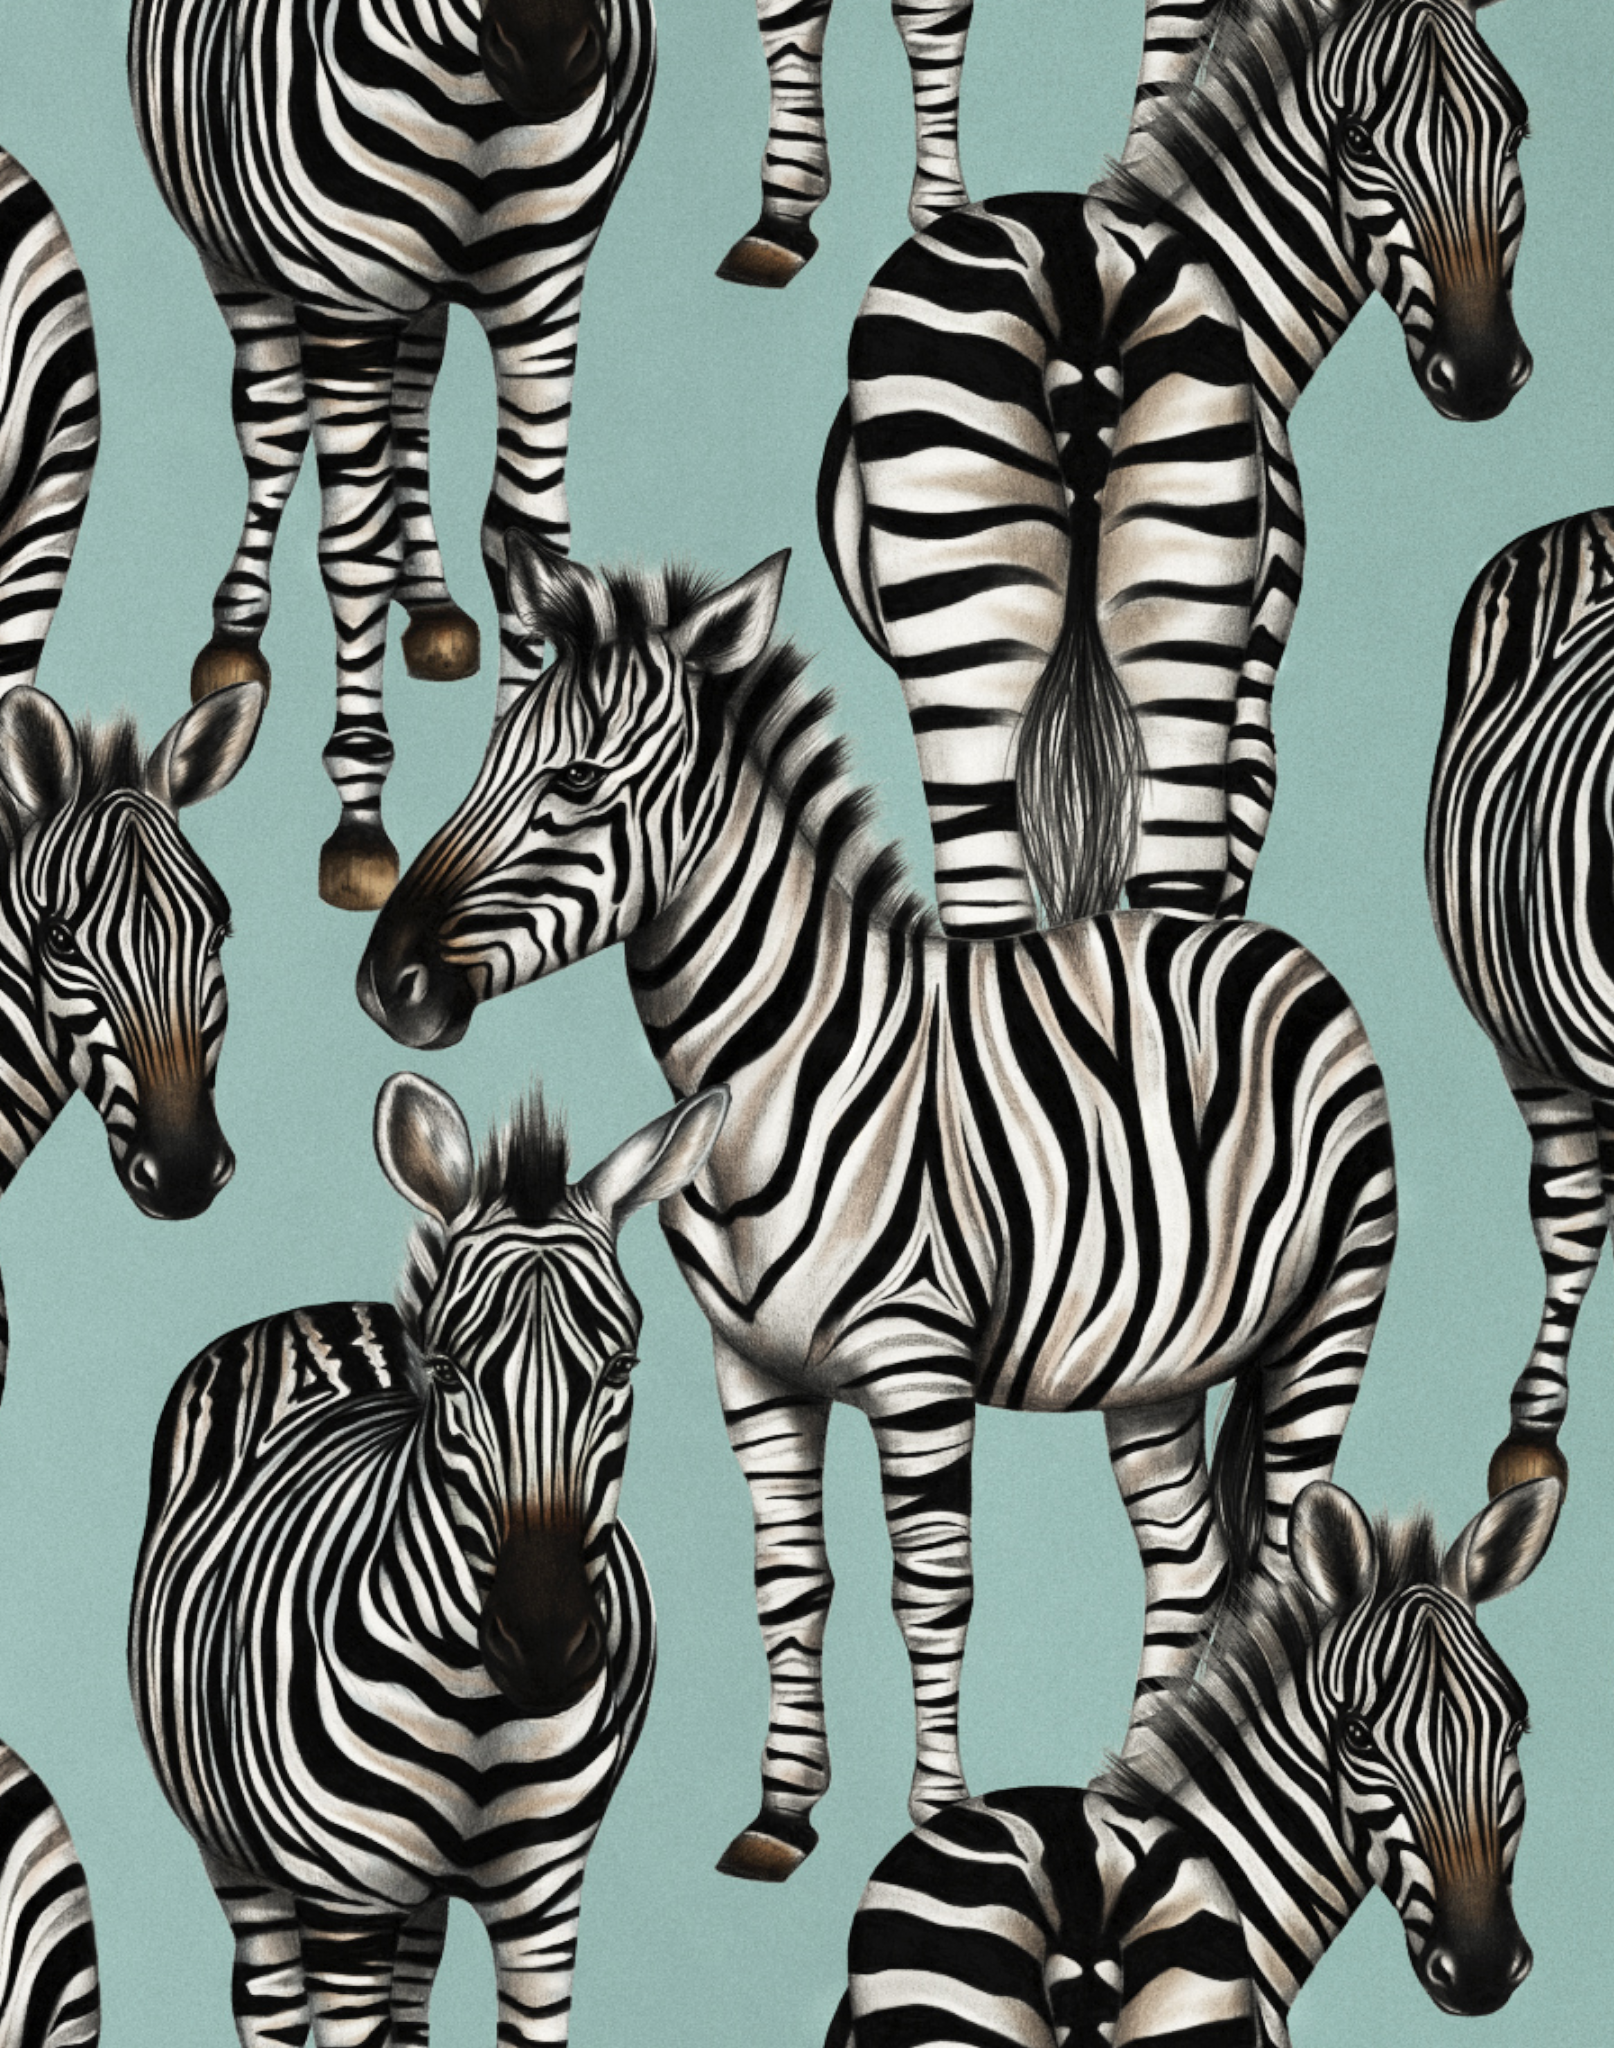 Zebras – The Collective Pattern